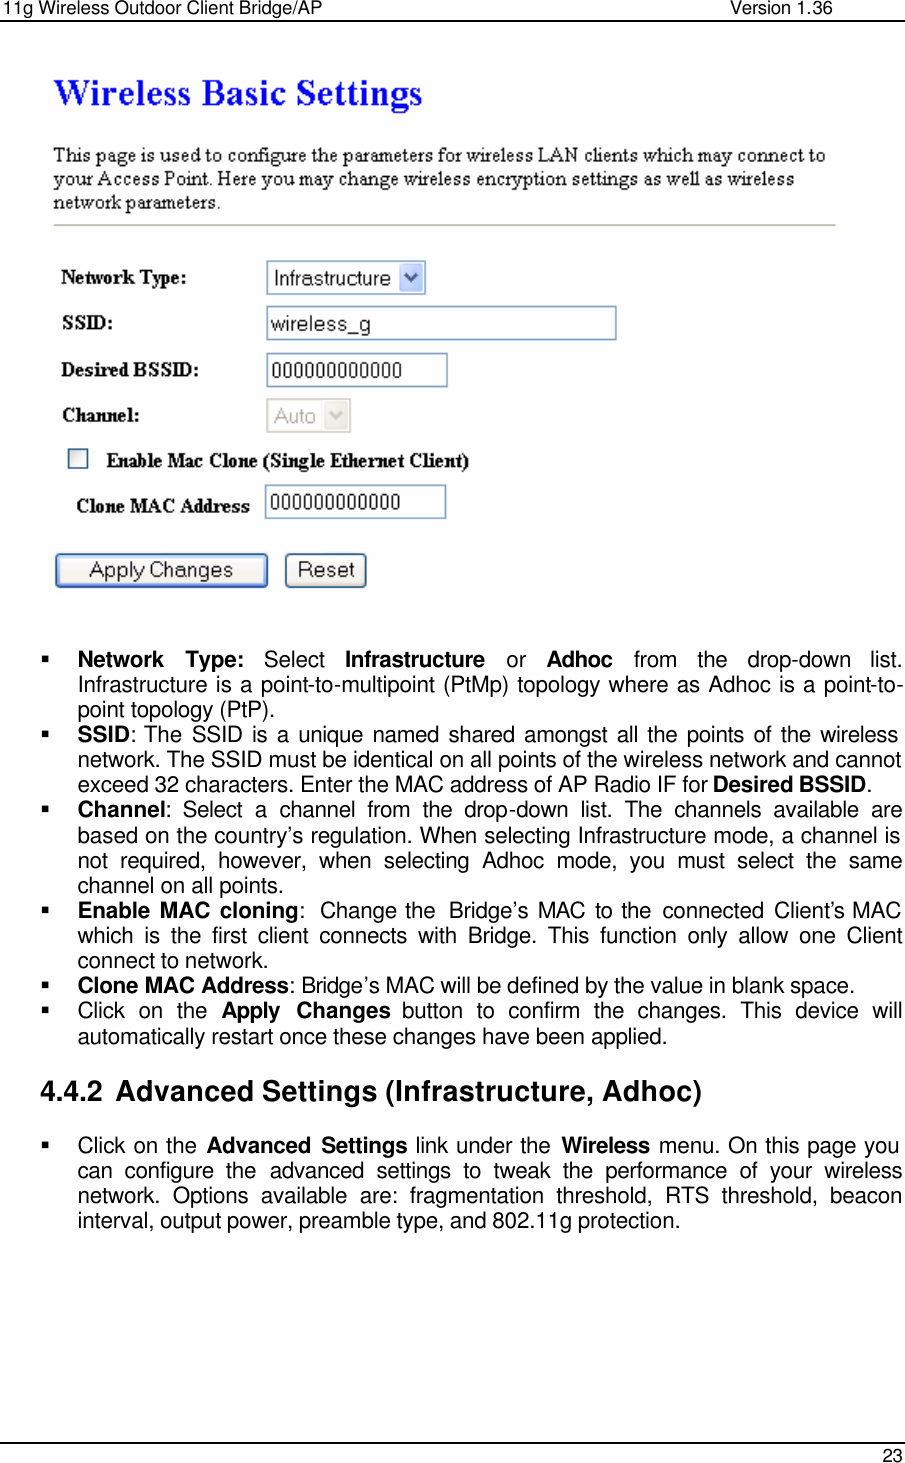 11g Wireless Outdoor Client Bridge/AP                Version 1.36    23     § Network Type: Select  Infrastructure or Adhoc from the drop-down list. Infrastructure is a point-to-multipoint (PtMp) topology where as Adhoc is a point-to-point topology (PtP). § SSID: The SSID is a unique named shared amongst all the points of the wireless network. The SSID must be identical on all points of the wireless network and cannot exceed 32 characters. Enter the MAC address of AP Radio IF for Desired BSSID. § Channel: Select a channel from the drop-down list. The channels available are based on the country’s regulation. When selecting Infrastructure mode, a channel is not required, however, when selecting Adhoc mode, you must select the same channel on all points.  § Enable MAC cloning:  Change the  Bridge’s MAC to the connected Client’s MAC which is the first client connects with Bridge. This function only allow one Client connect to network. § Clone MAC Address: Bridge’s MAC will be defined by the value in blank space. § Click on the Apply Changes button to confirm the changes. This device will automatically restart once these changes have been applied.   4.4.2 Advanced Settings (Infrastructure, Adhoc) § Click on the Advanced Settings link under the Wireless menu. On this page you can configure the advanced settings to tweak the performance of your wireless network. Options available are: fragmentation threshold, RTS threshold, beacon interval, output power, preamble type, and 802.11g protection.   